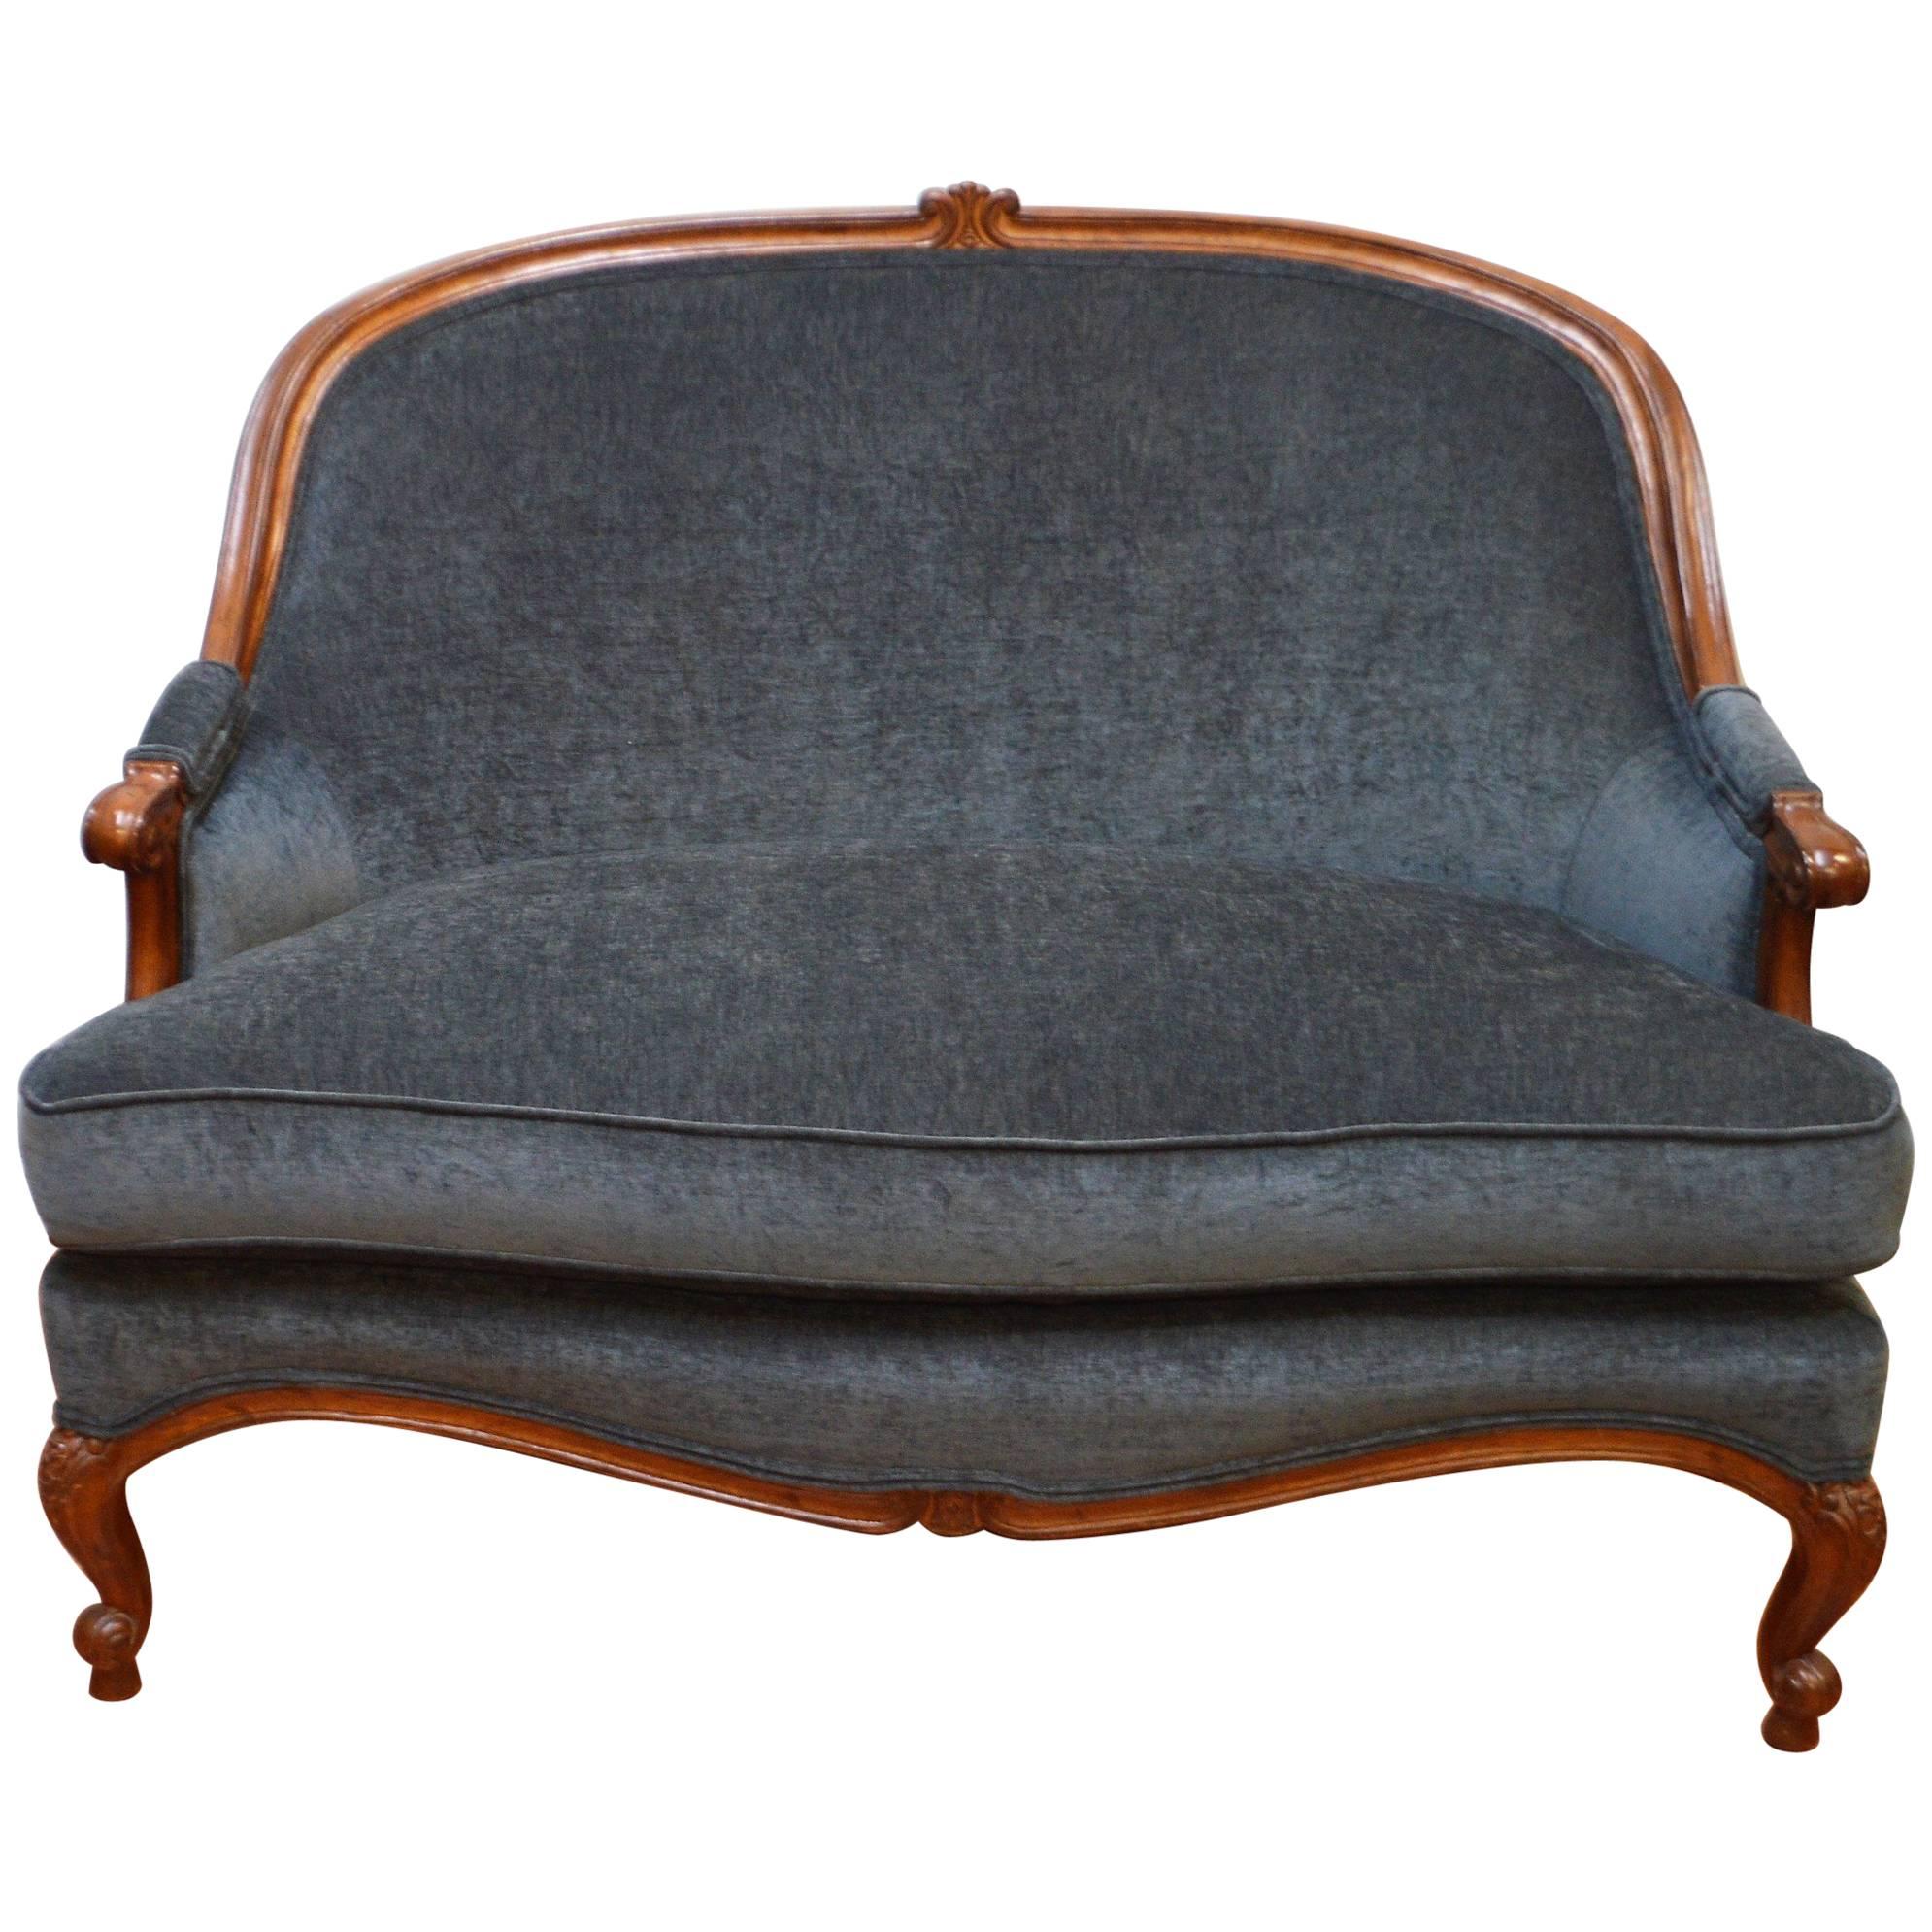 Louis XV Style Walnut Settee, Canape, Newly Upholstered in a Blue/Grey Chenille